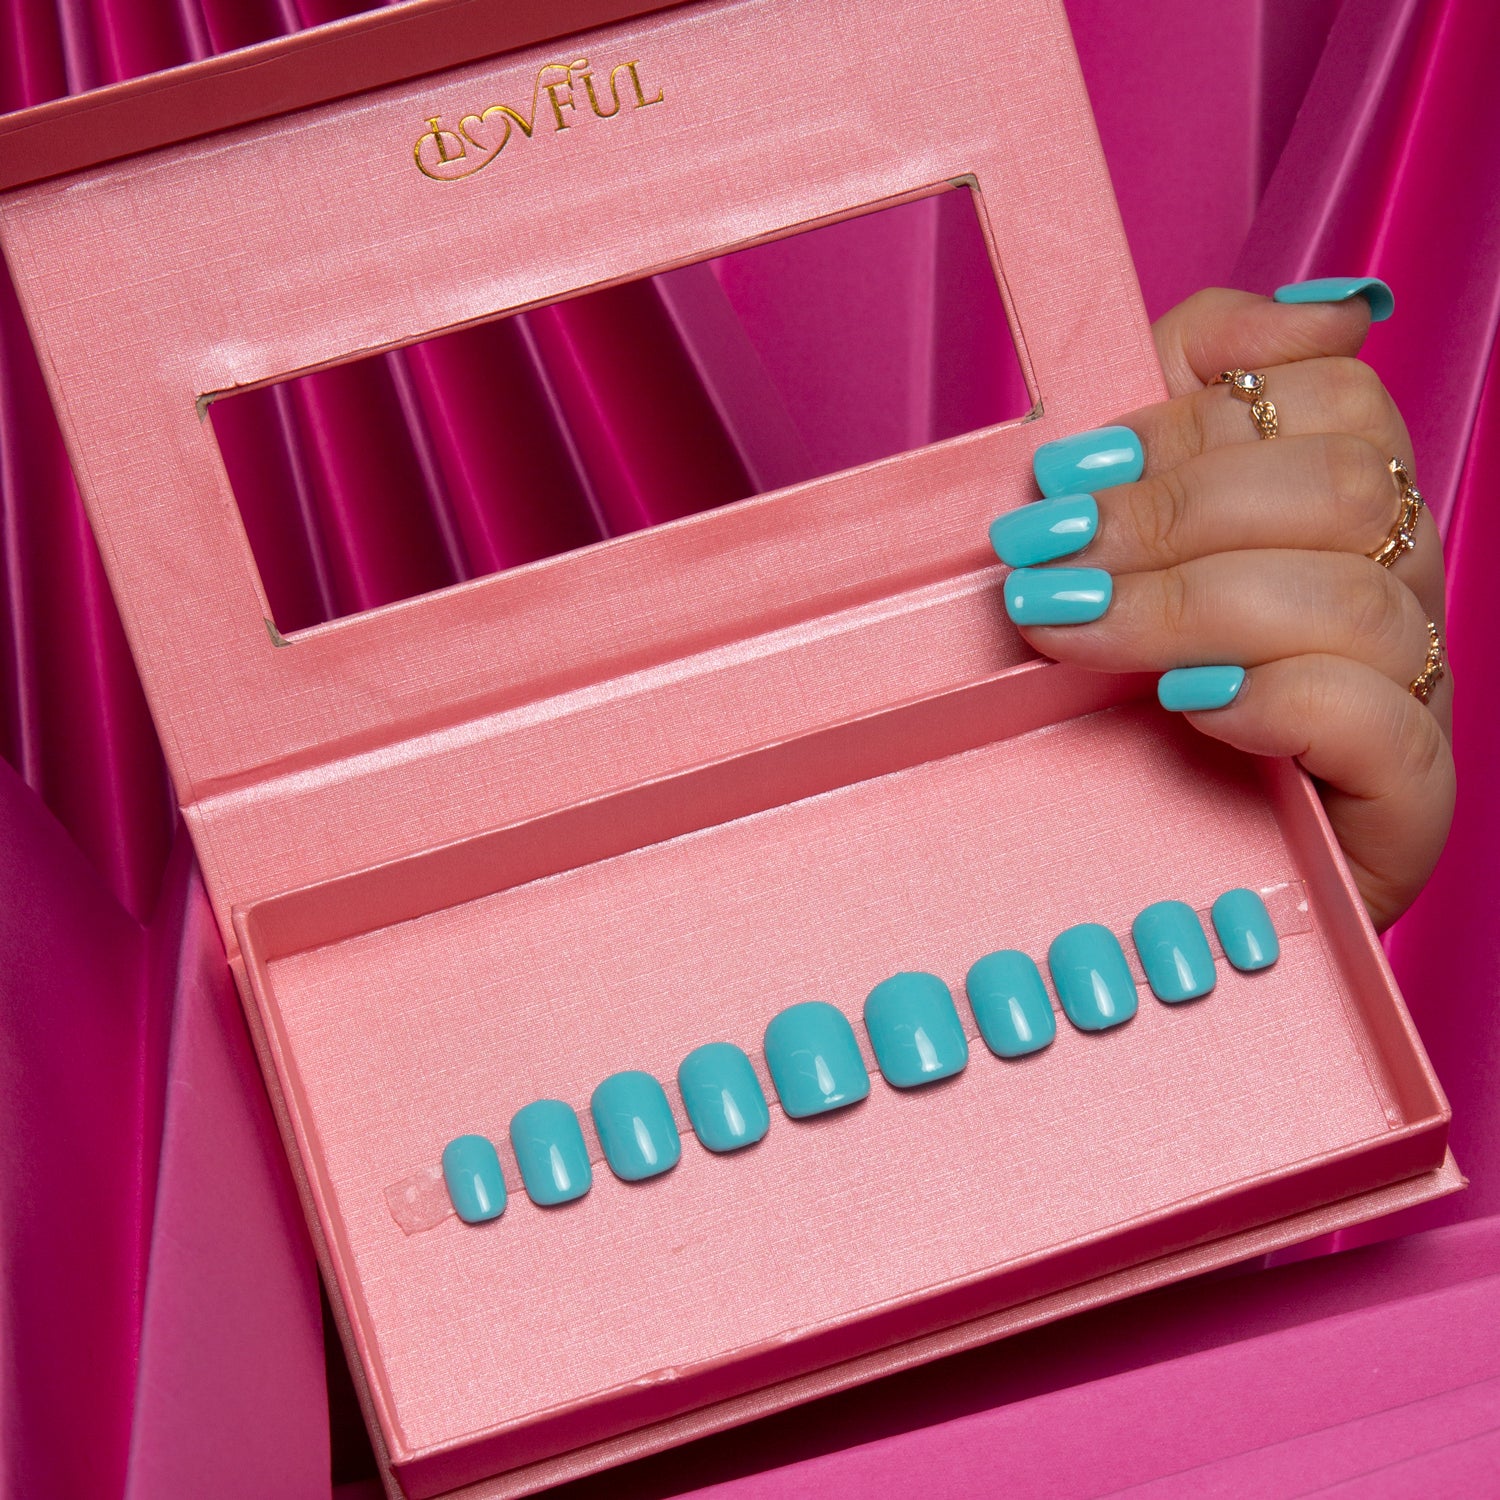 Shiny Blue press-on acrylic nails in a pink box with the Lovful logo, against a pink background.